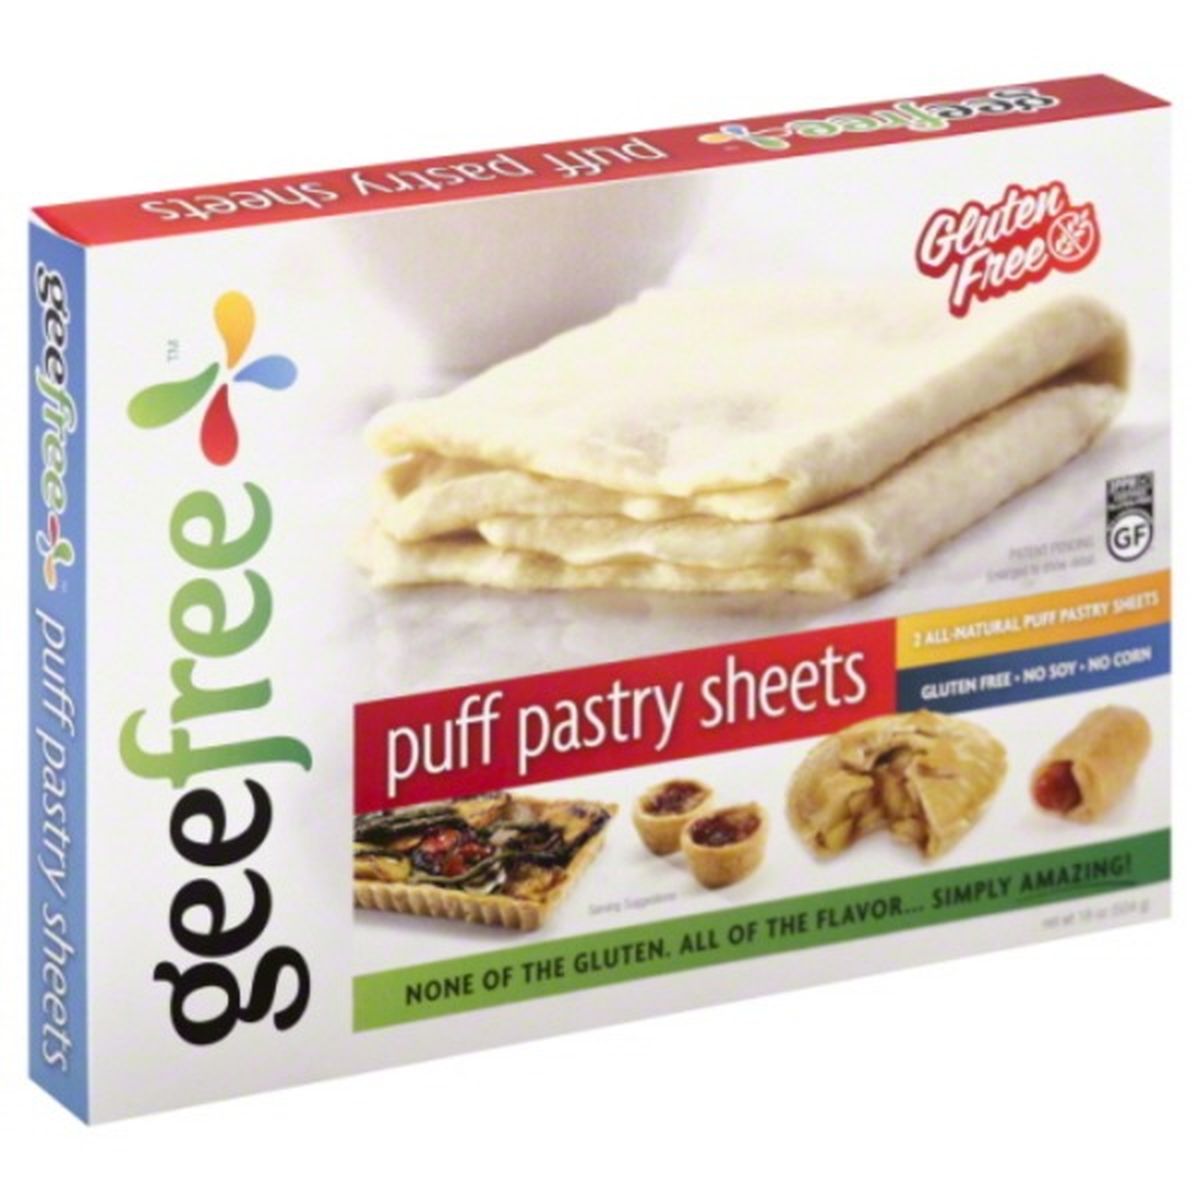 Calories in GeeFree Puff Pastry Sheets